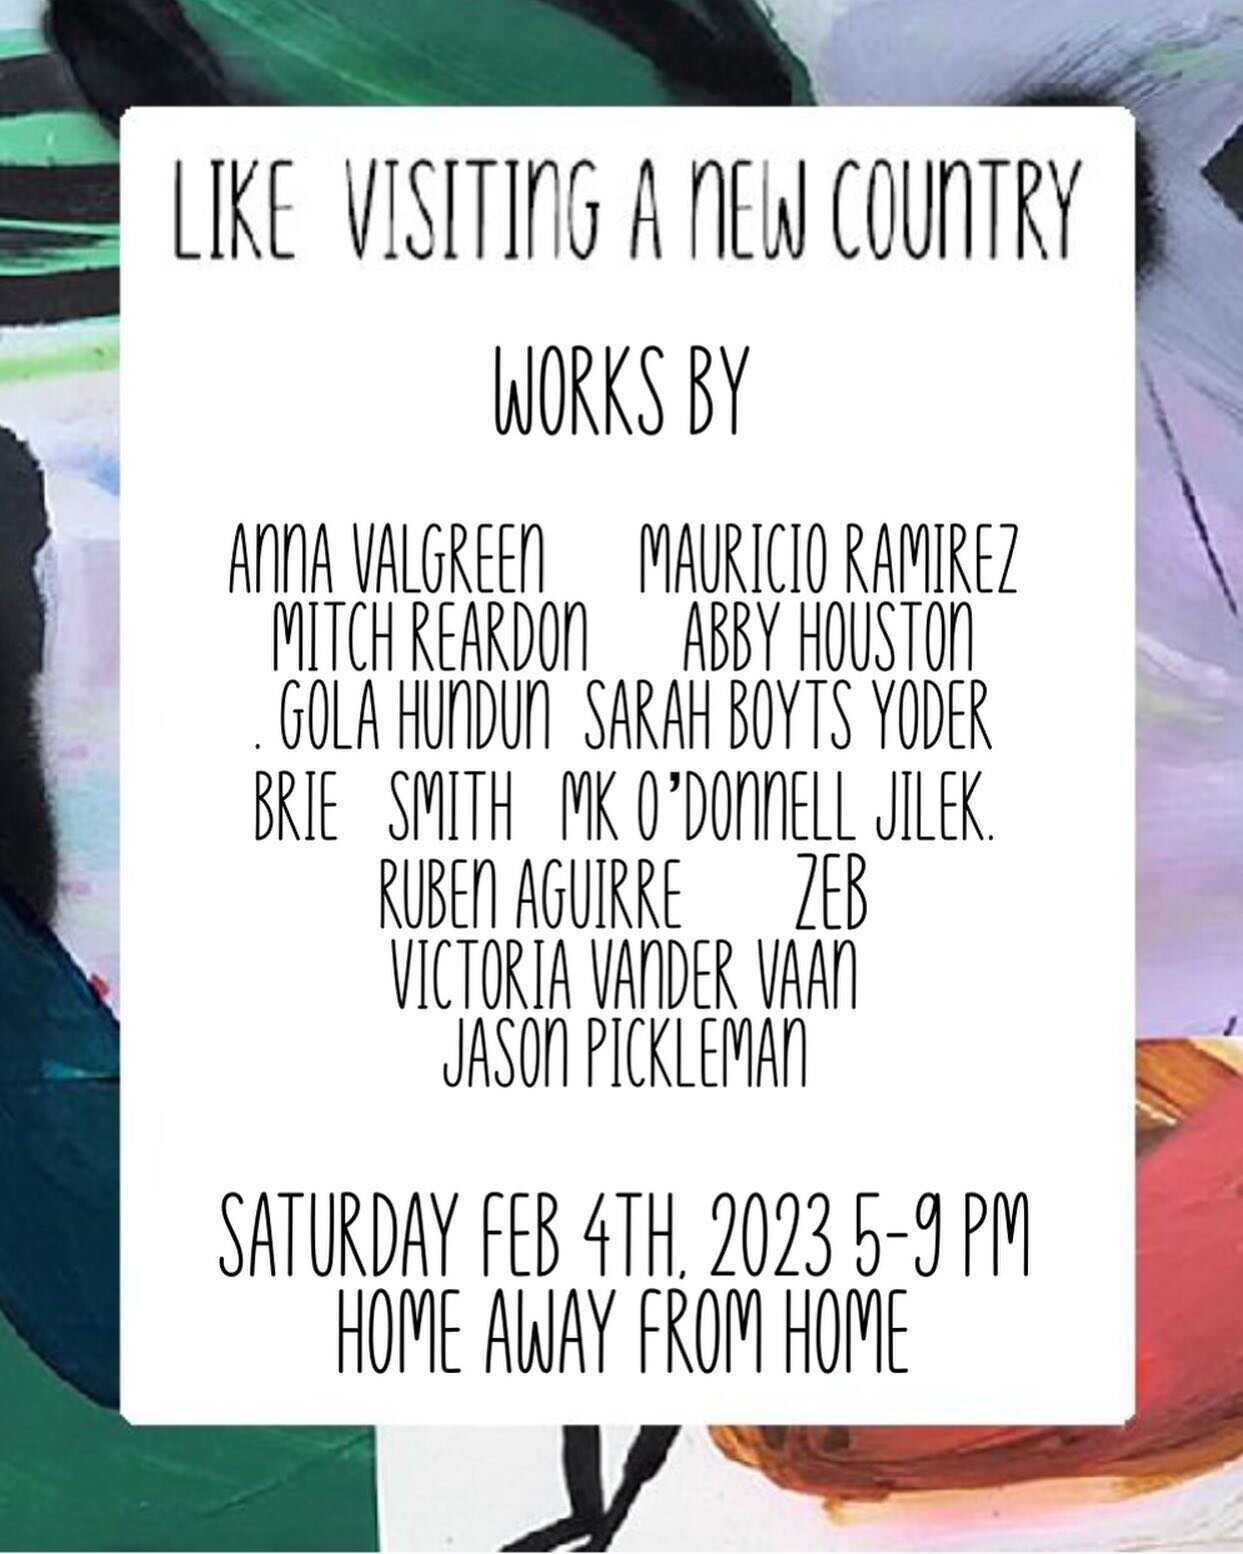 I&rsquo;m honored to be showing with these amazing artist this Saturday at @homeawayfromhomechicago February 4th 2023 #seeyouthere